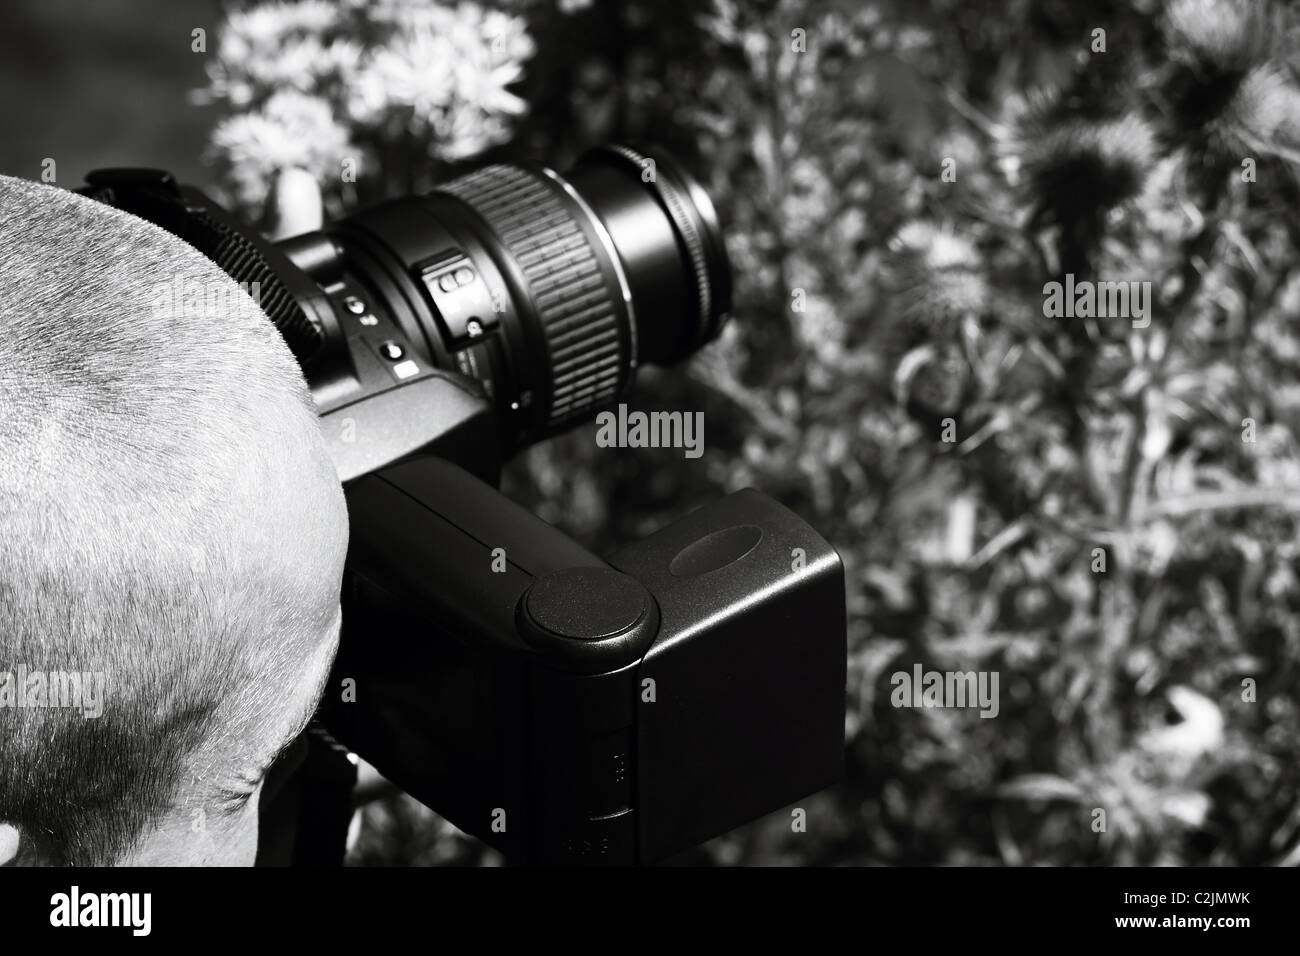 A skinhead male taking photographs through a bush, photo is black and white. Stock Photo